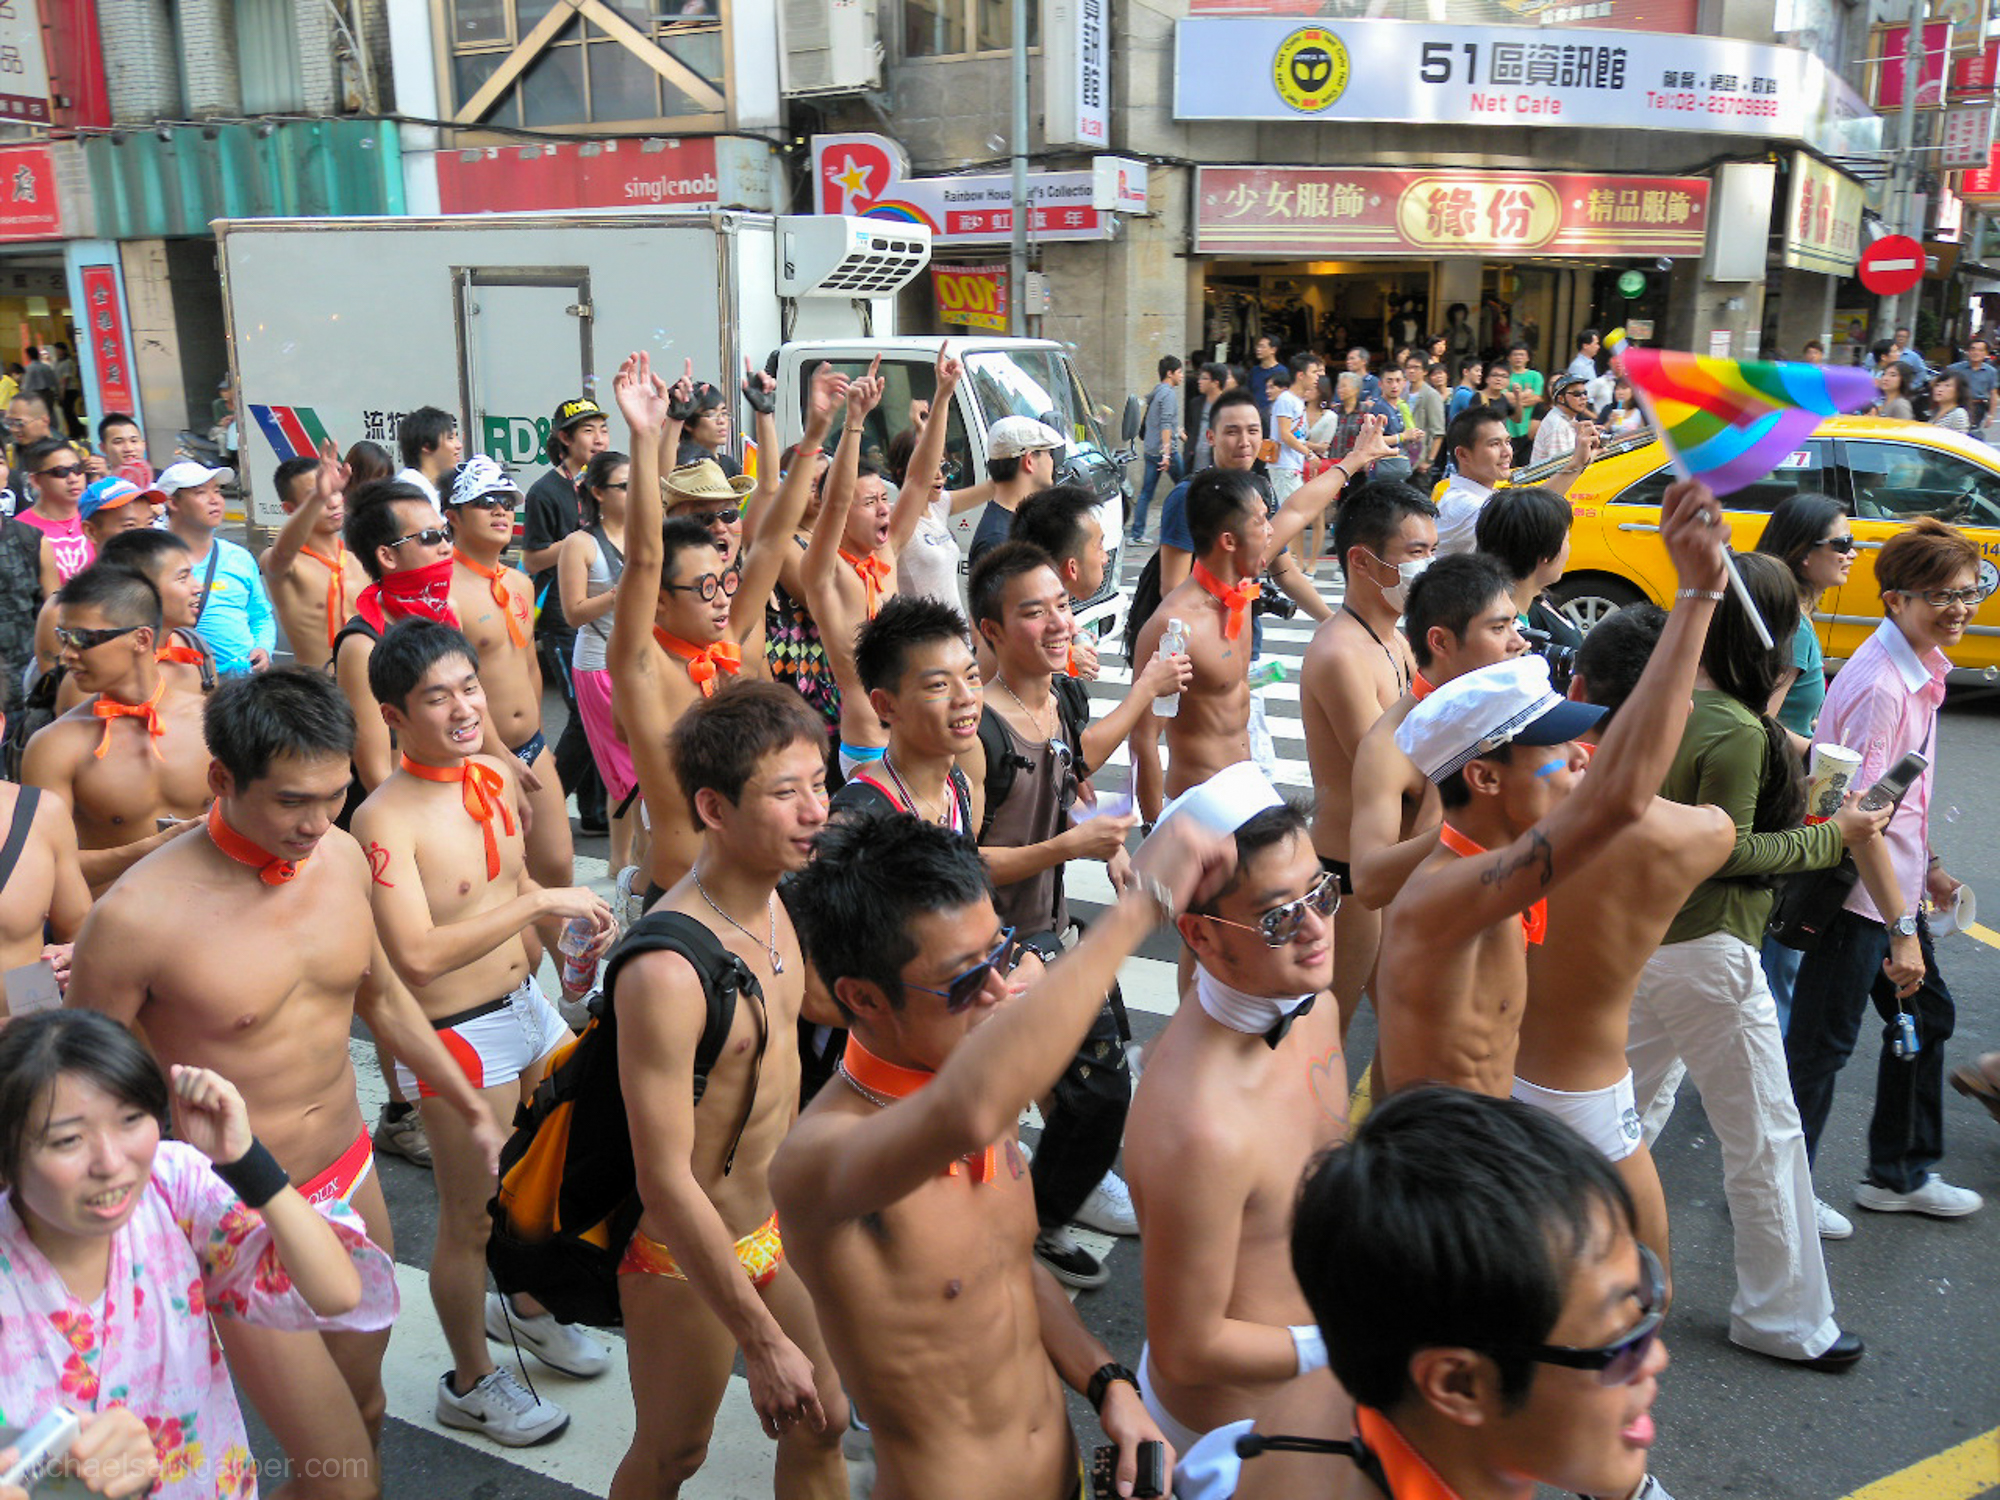 Taiwan Pride first started in 2003, and grew in popularity year on year, Taiwan Pride, 2009